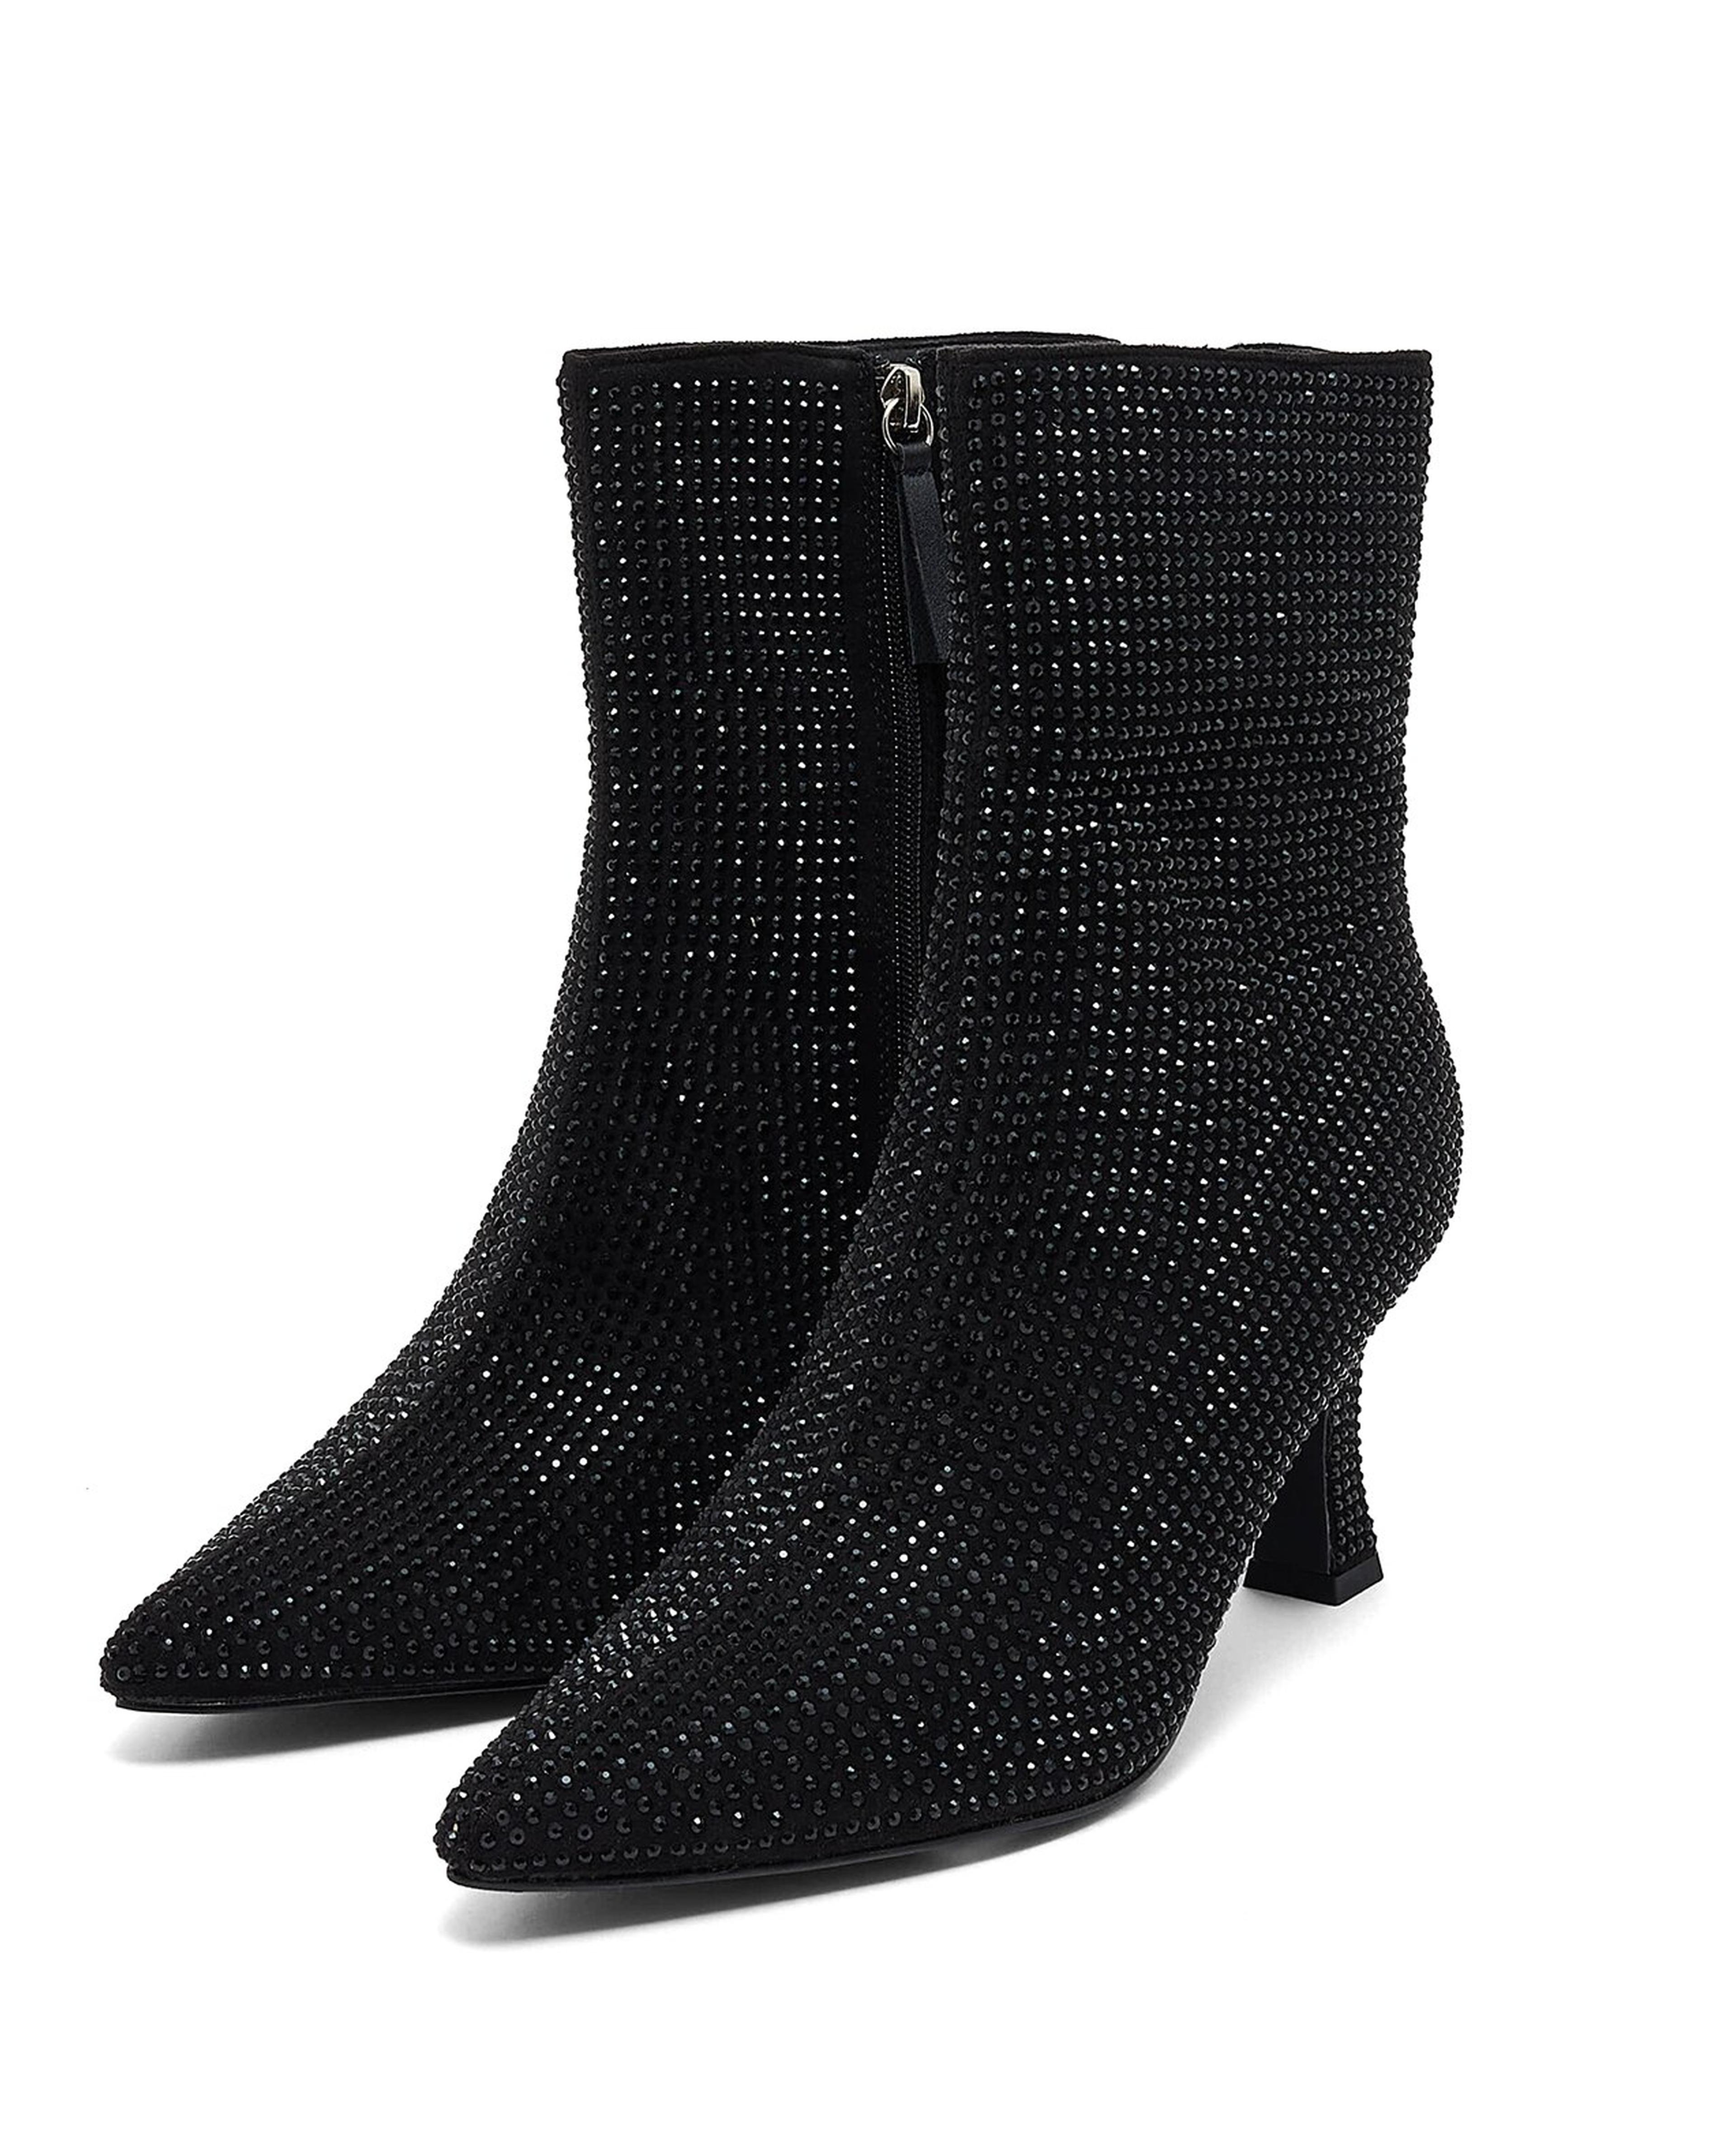 Stone Embellished Heel Ankle Boots